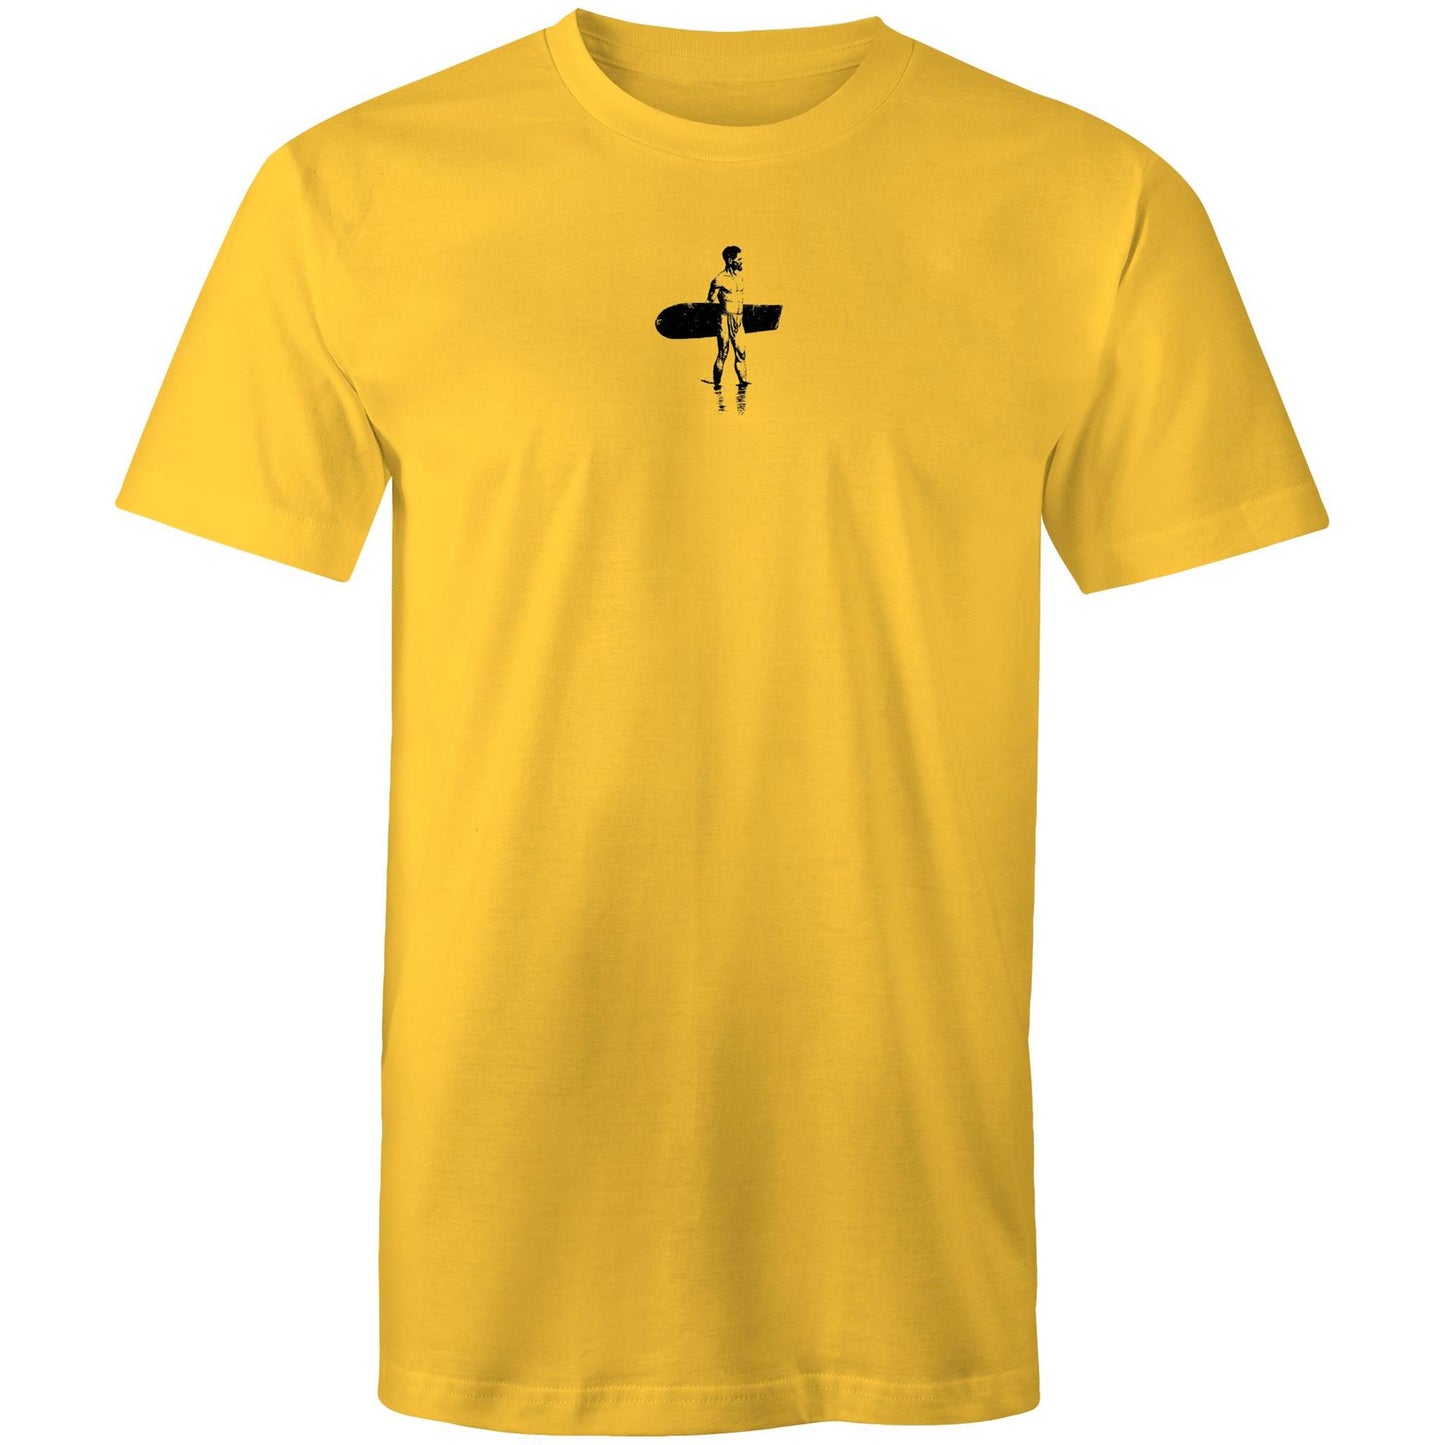 Finless is More T Shirts for Men (Unisex)